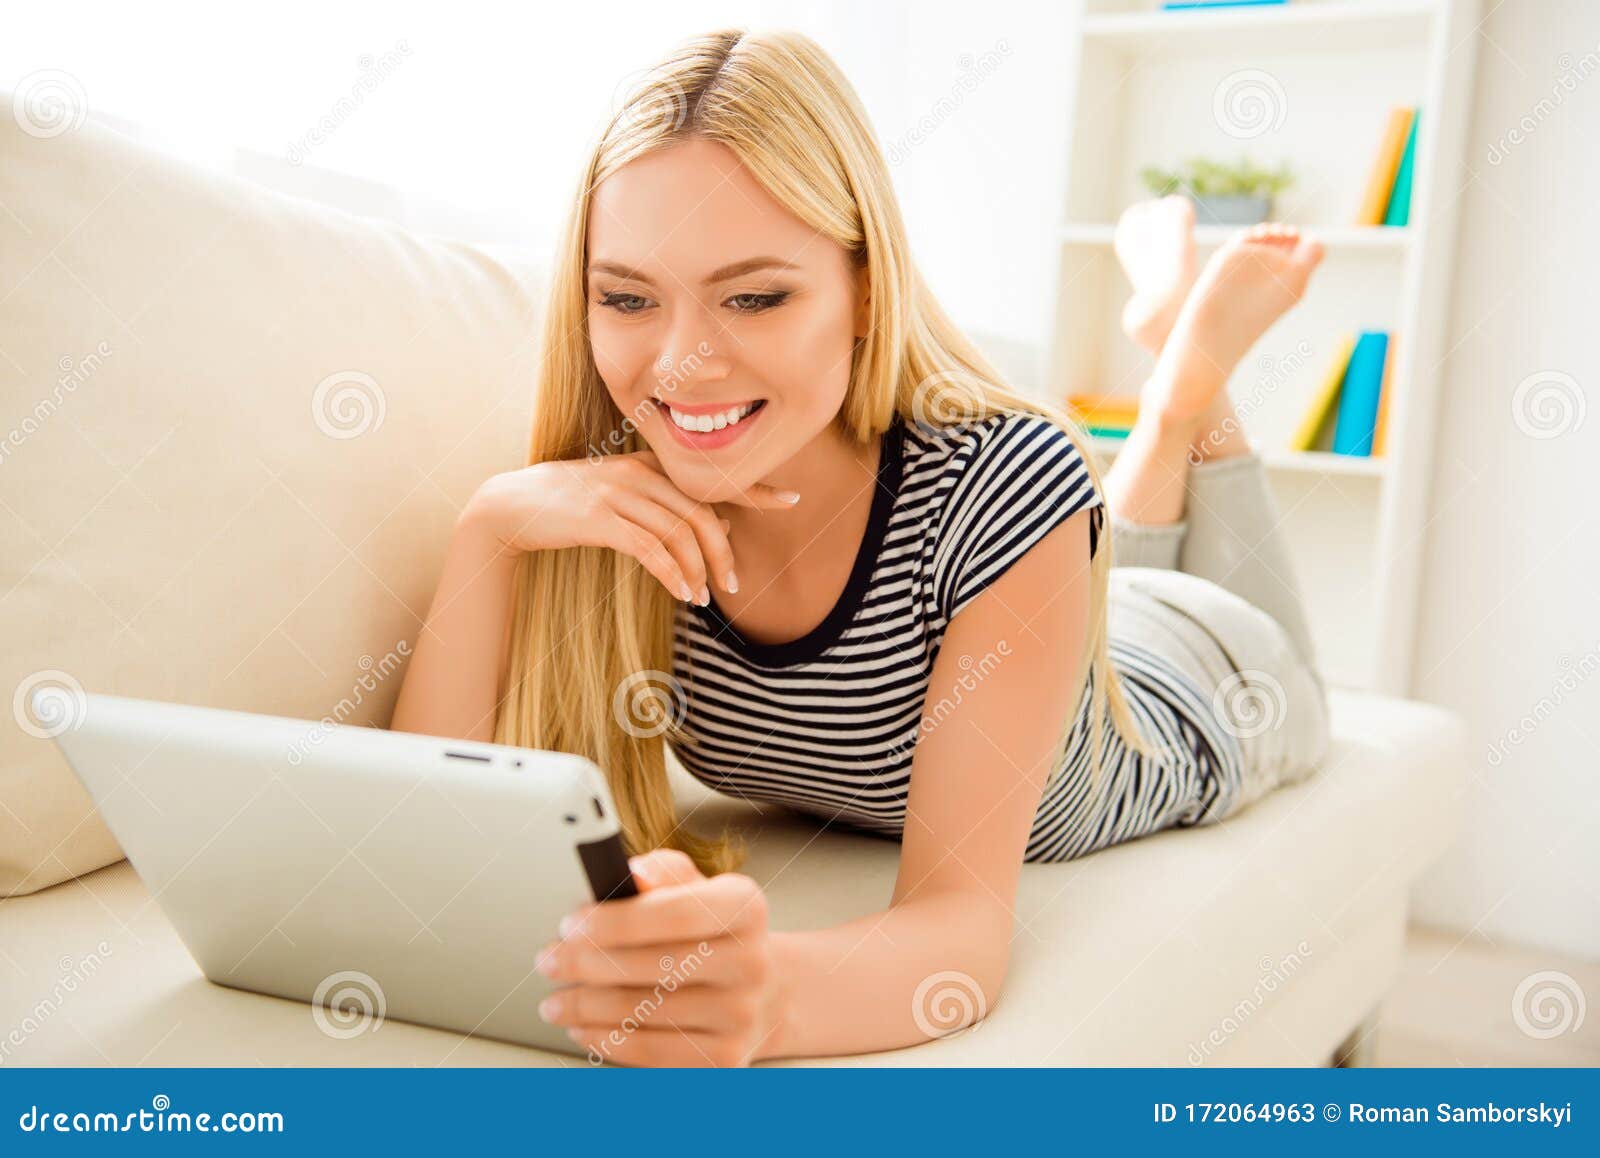 Young Girl Lying on Sofa and Reading Book on Tablet Stock Image - Image ...